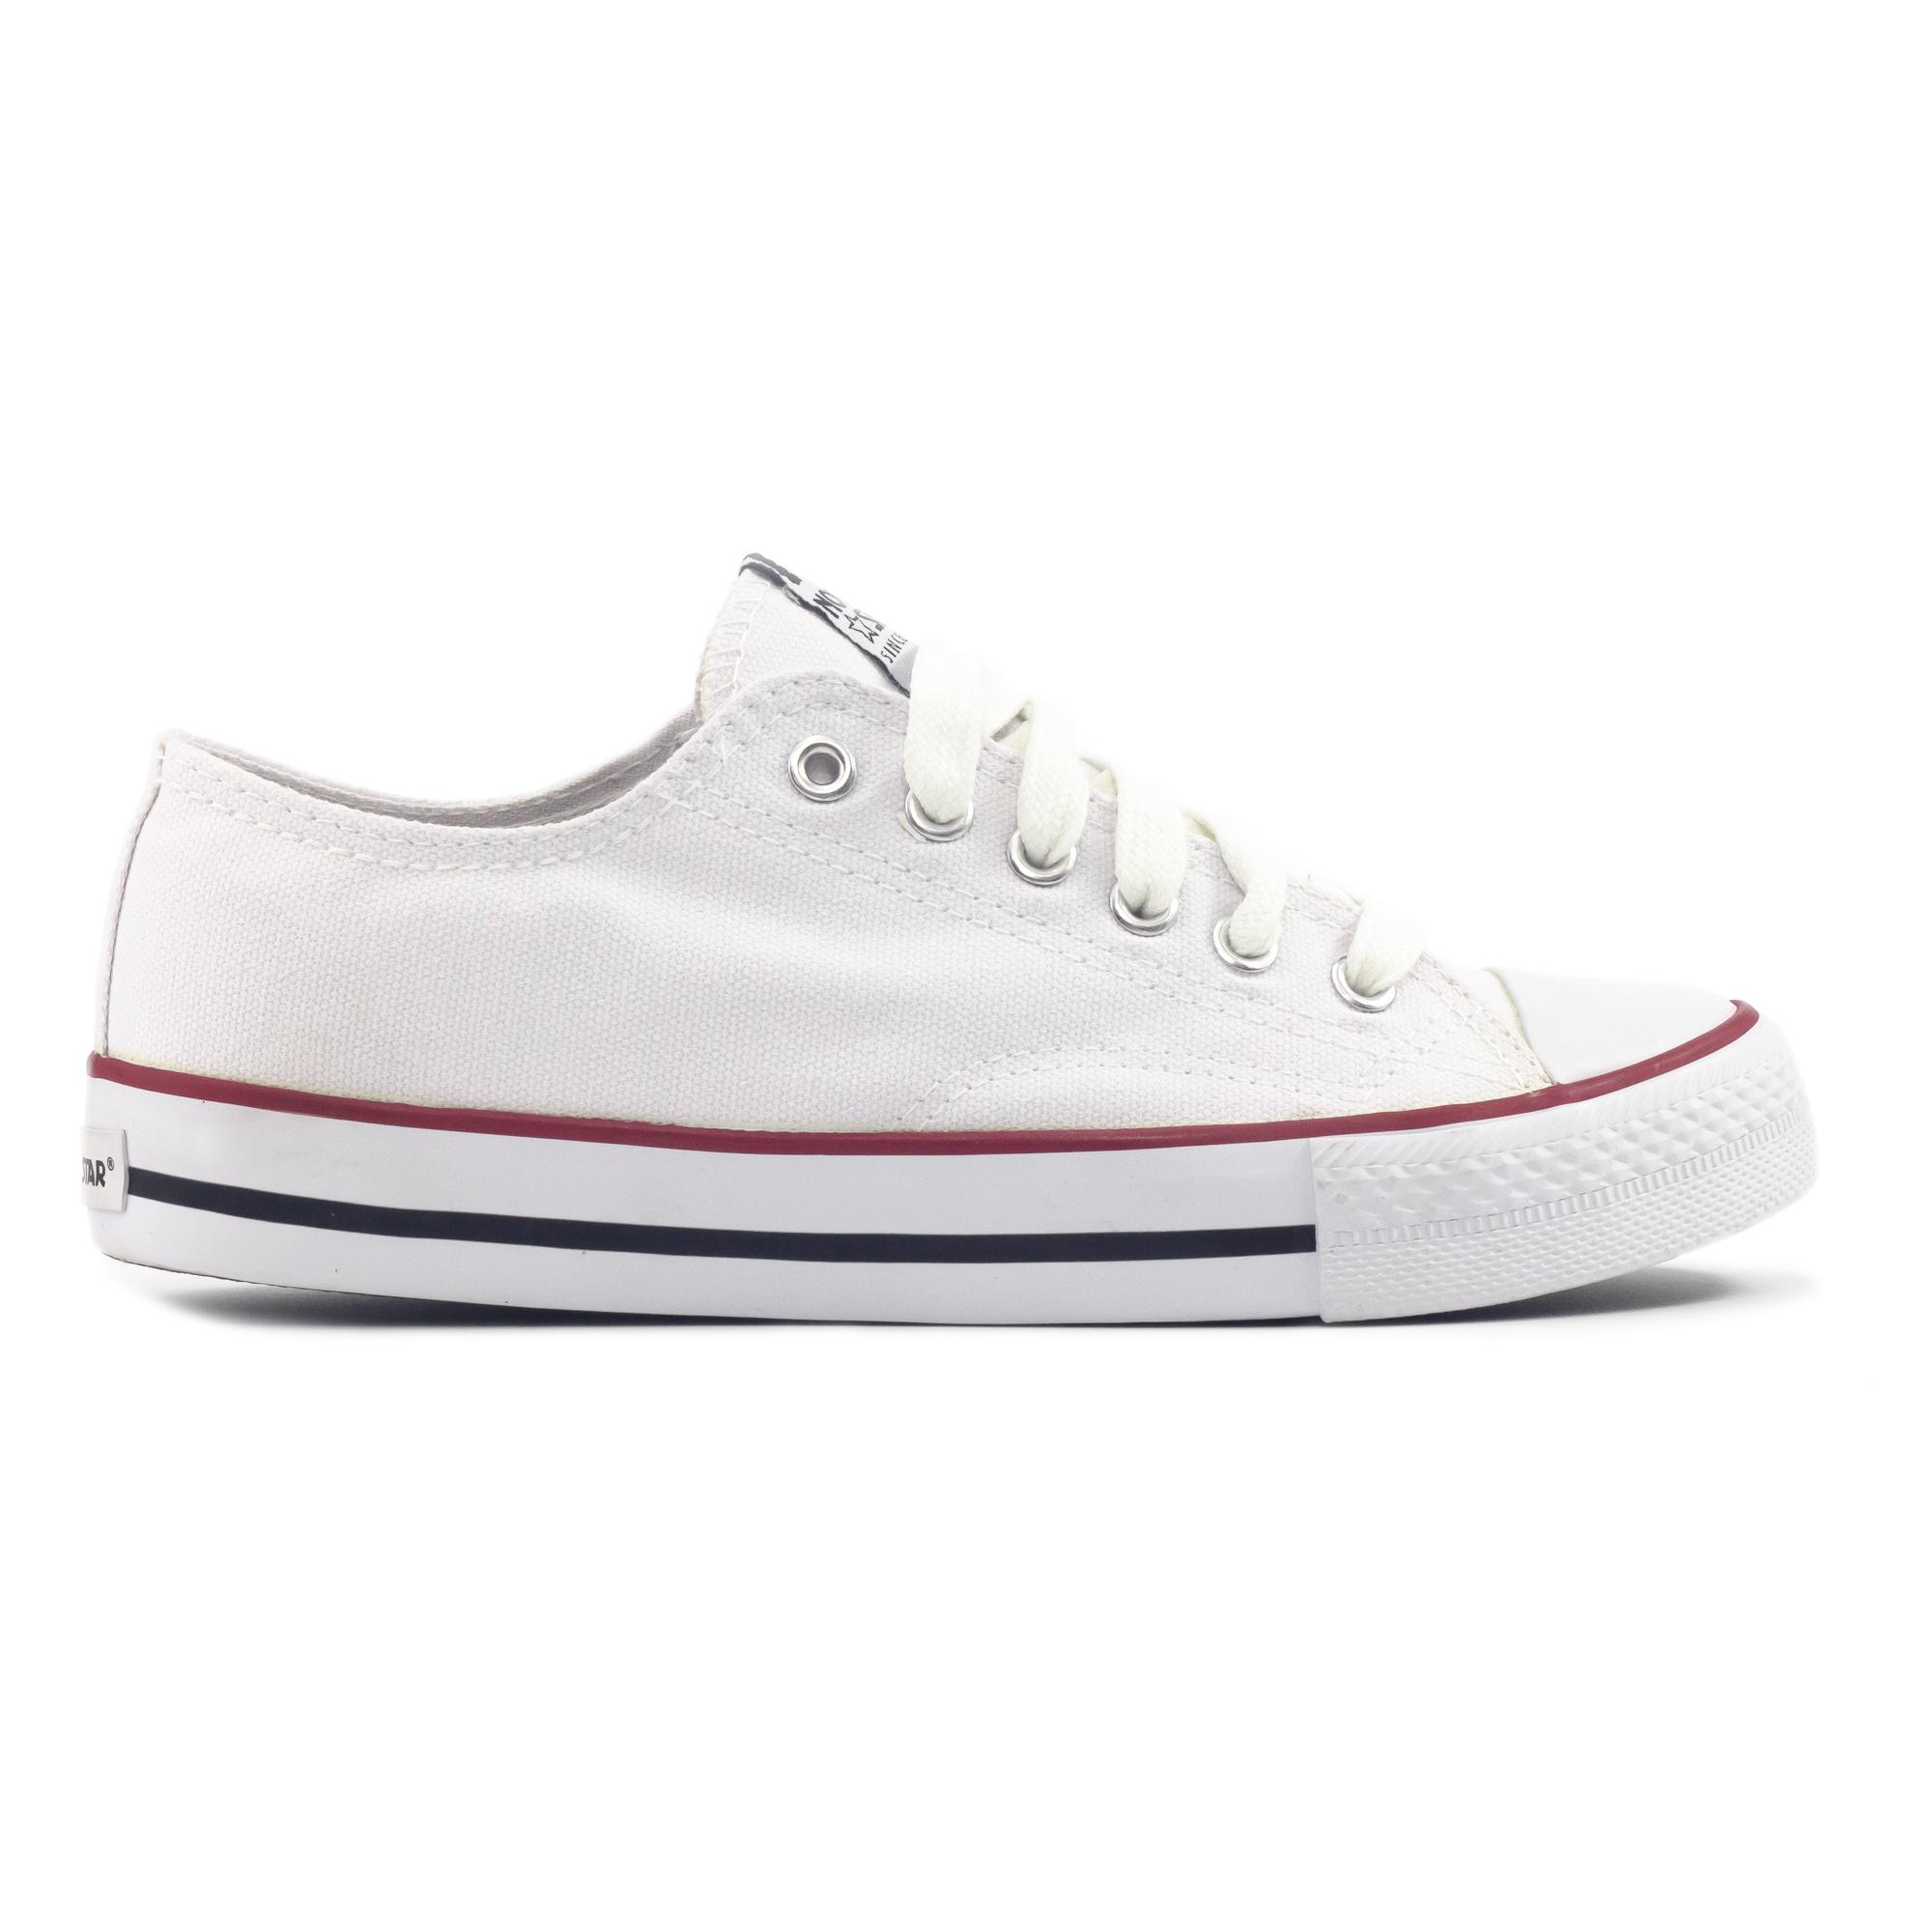 north star white sneakers